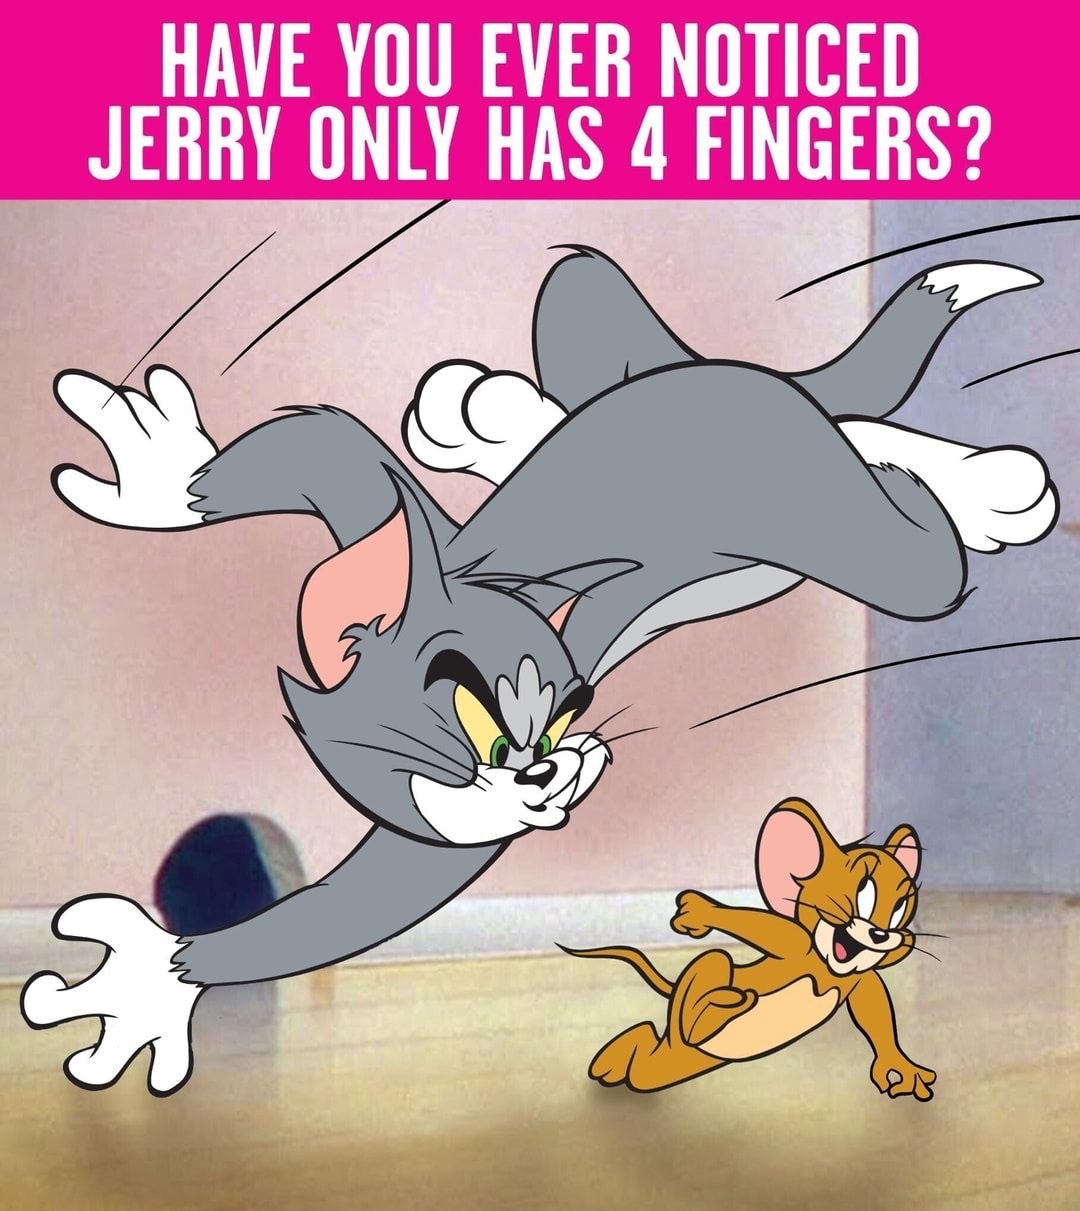 tom and jerry - Have You Ever Noticed Jerry Only Has 4 Fingers?